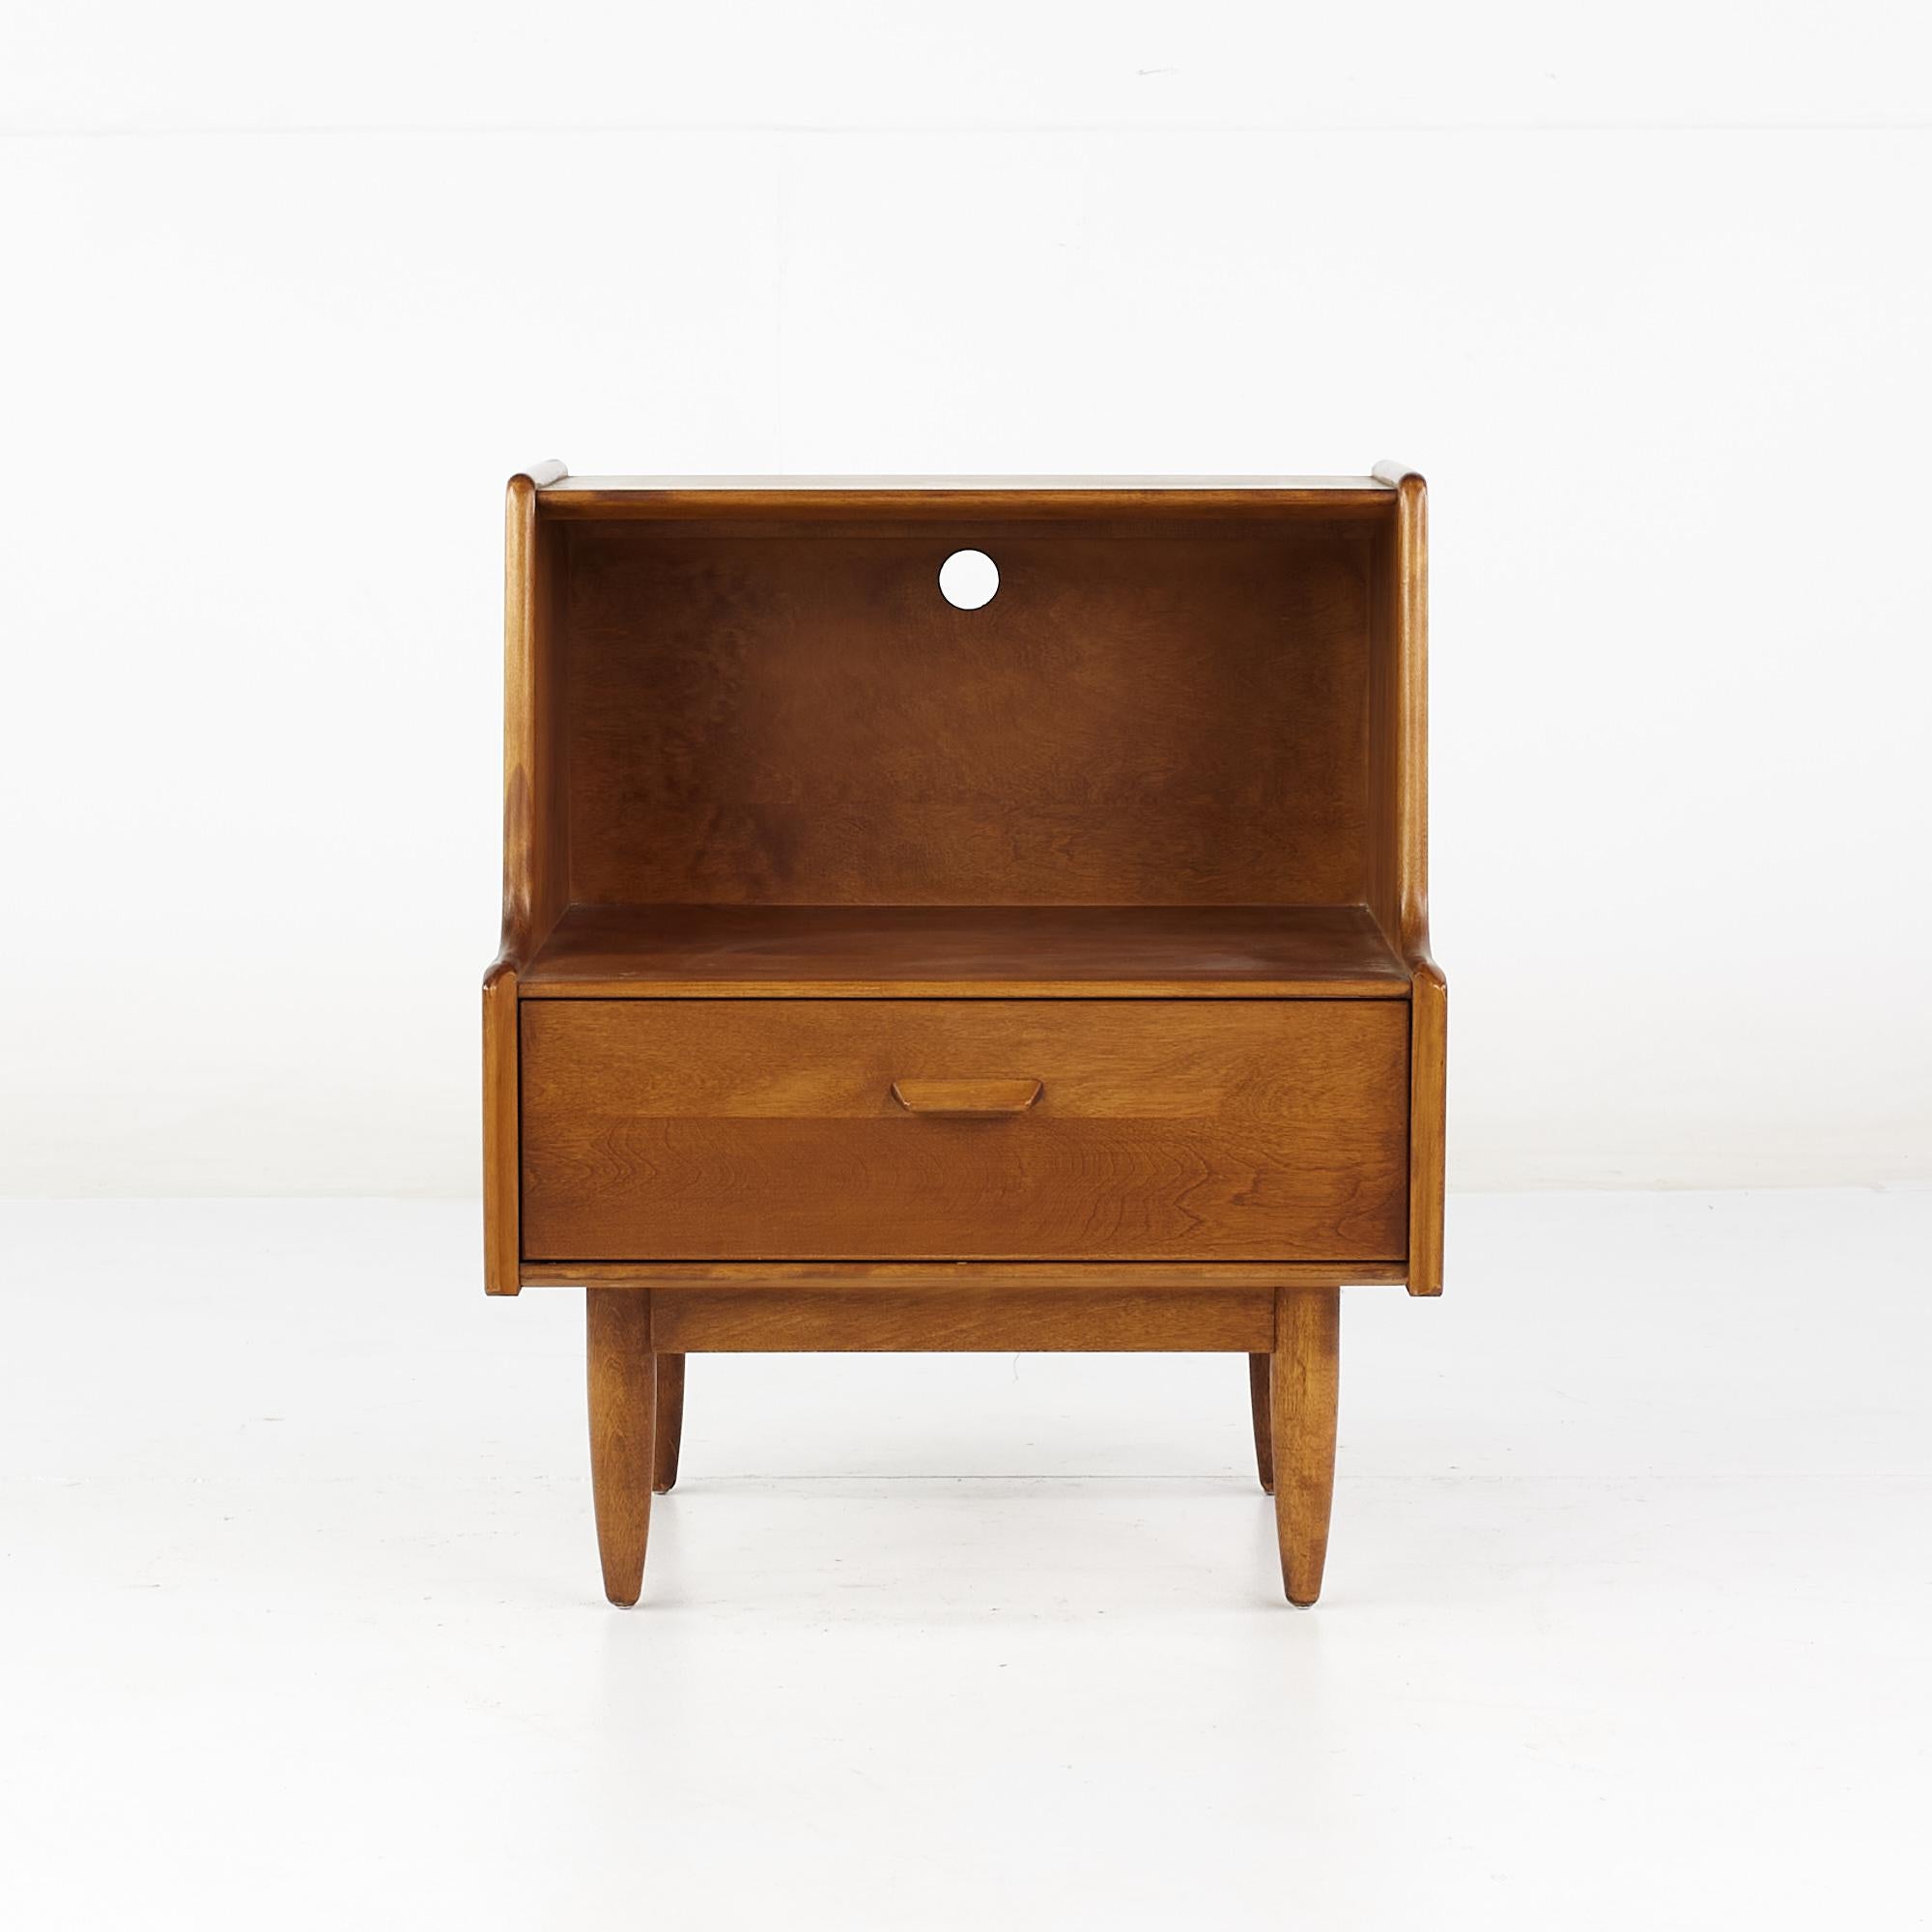 Russel Wright for Conant Ball Mid Century Maple nightstand

This nightstand measures: 22 wide x 19 deep x 25 inches high

All pieces of furniture can be had in what we call restored vintage condition. That means the piece is restored upon